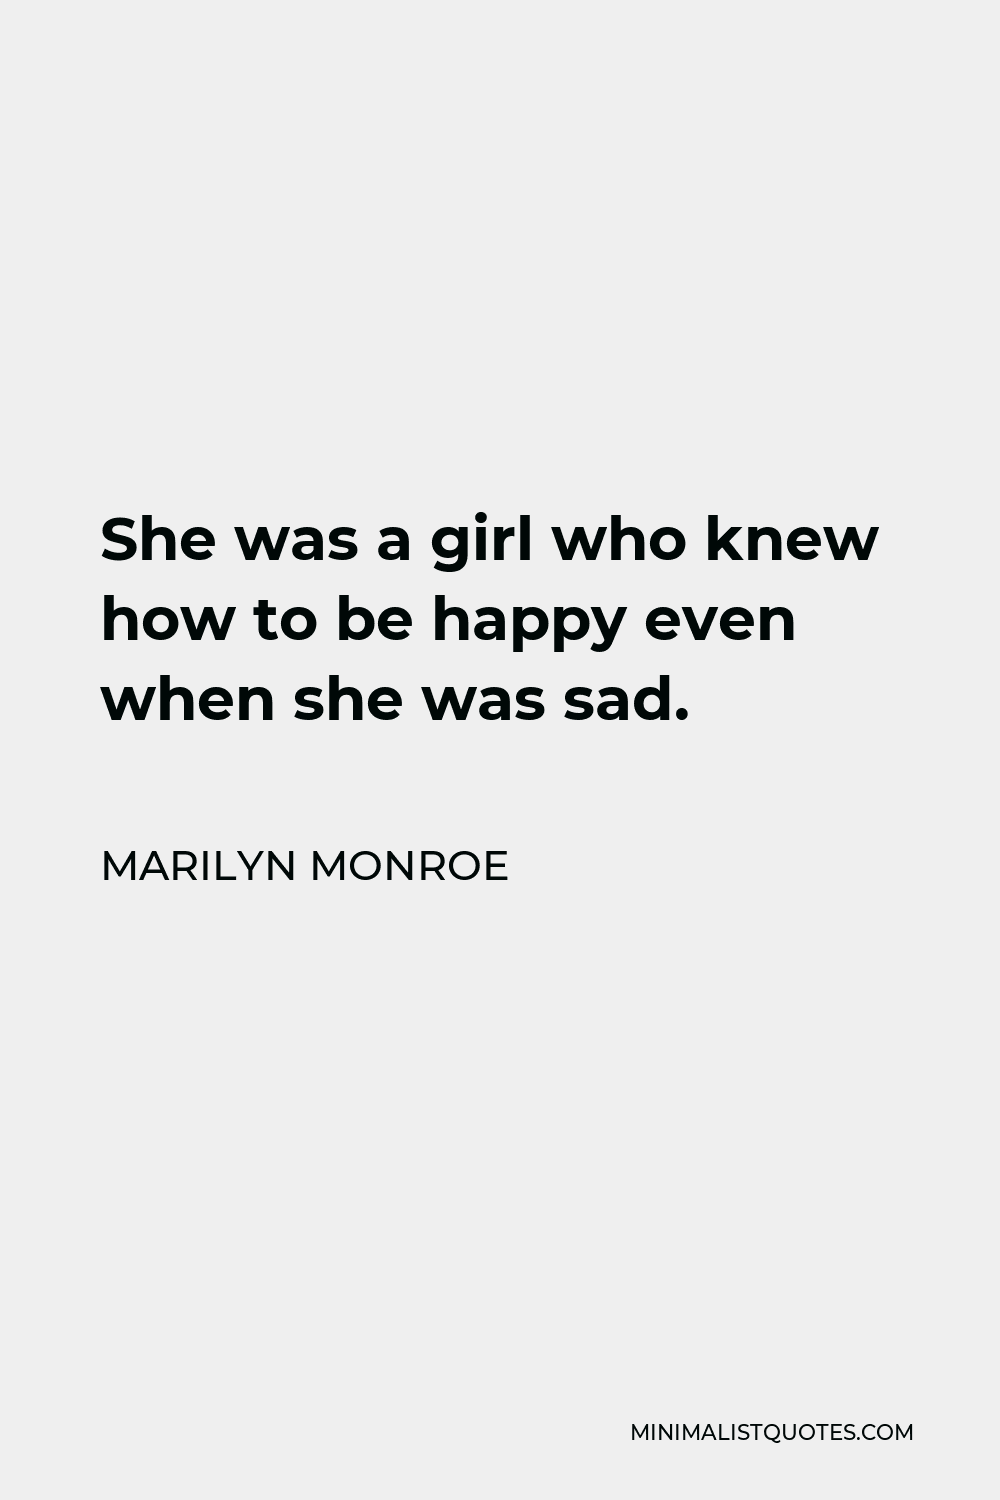 Marilyn Monroe Quote - She was a girl who knew how to be happy even when she was sad.